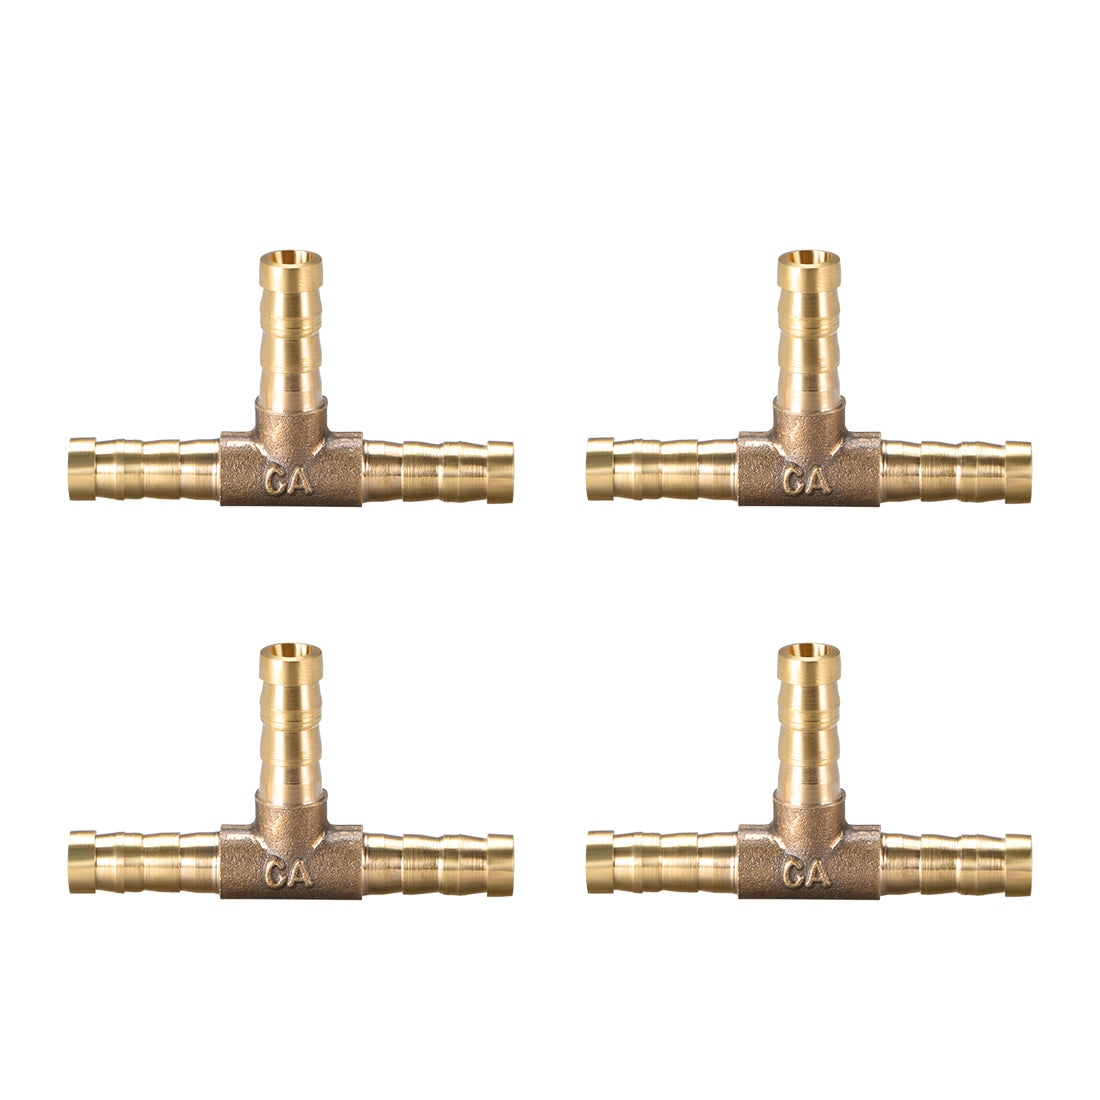 Uxcell Uxcell 16mm or 5/8" ID Brass Barb Splicer Fitting,T-Shaped 3Way,Barb Hose Fitting